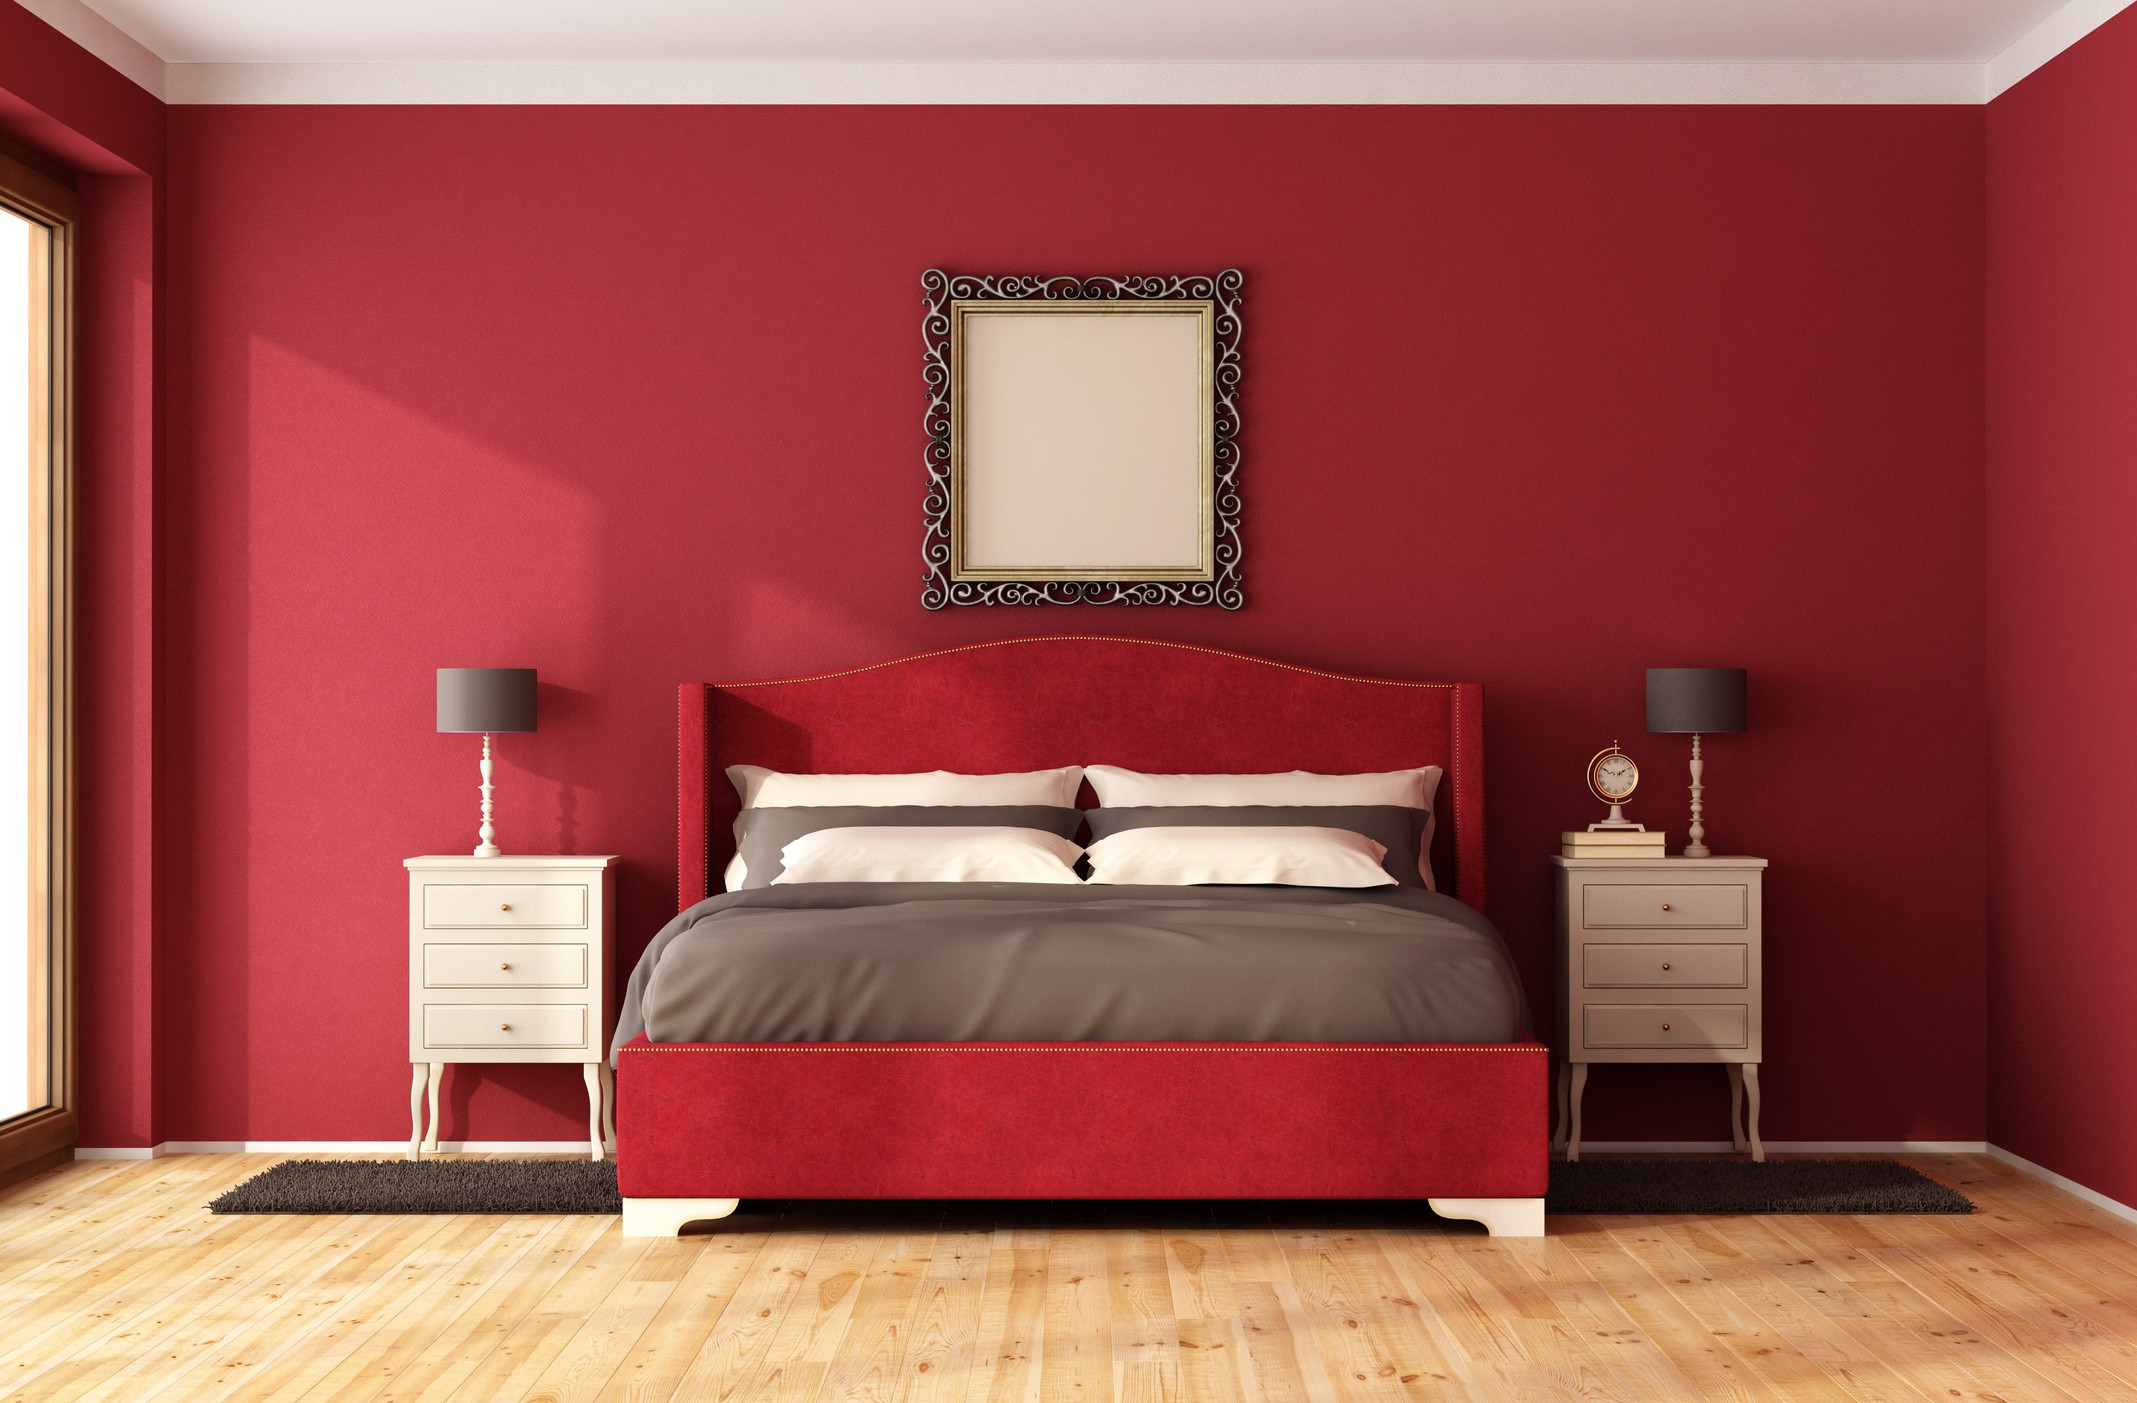 Red Paint In Bedroom
 These Are the Worst Paint Colors You Should Never Use in